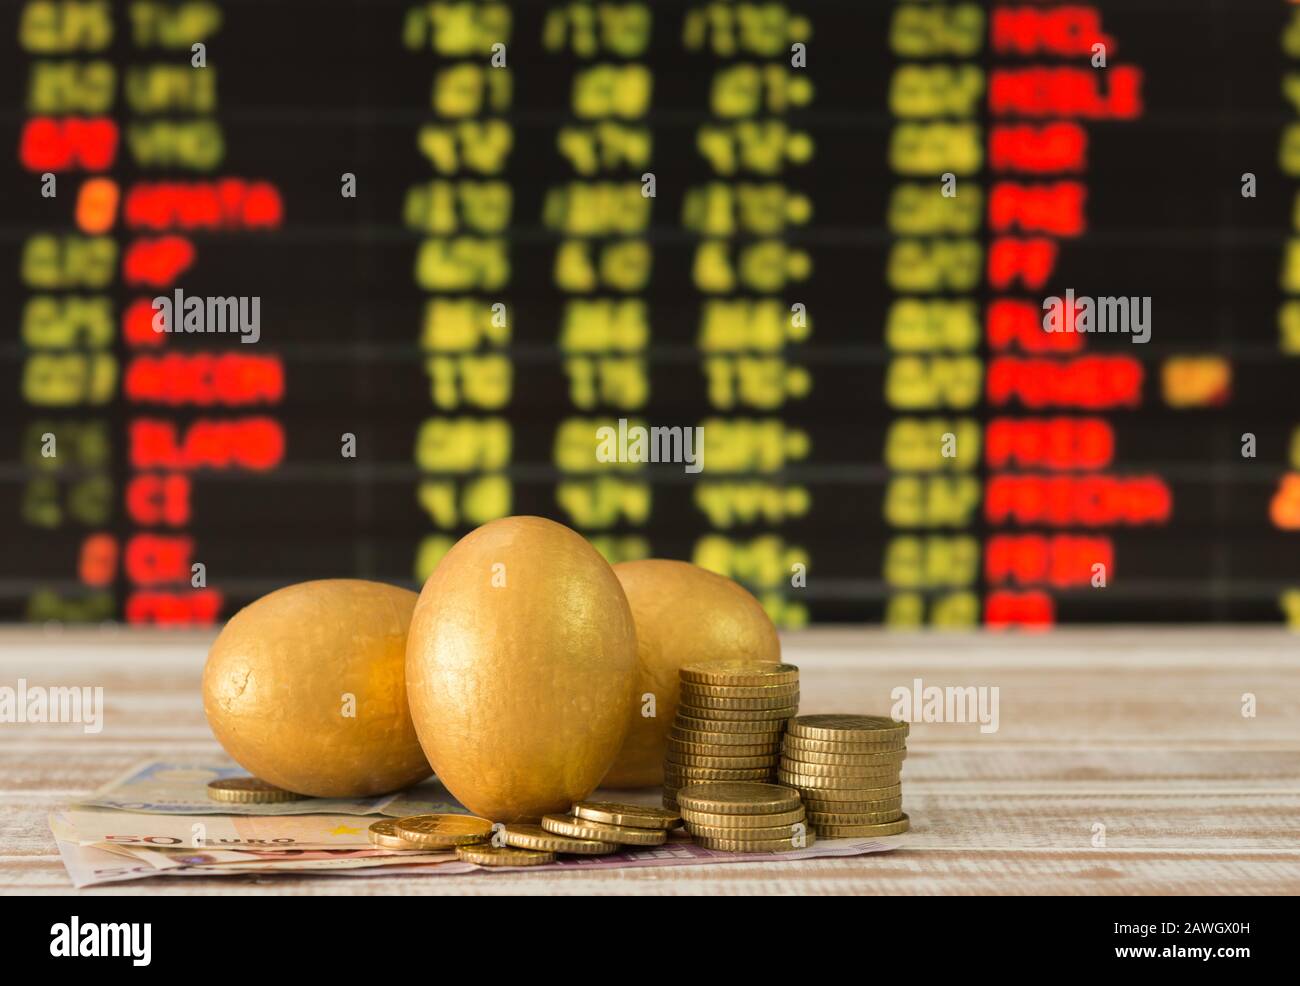 golden eggs,coins,banknote with the stock price board background. selective focus Stock Photo